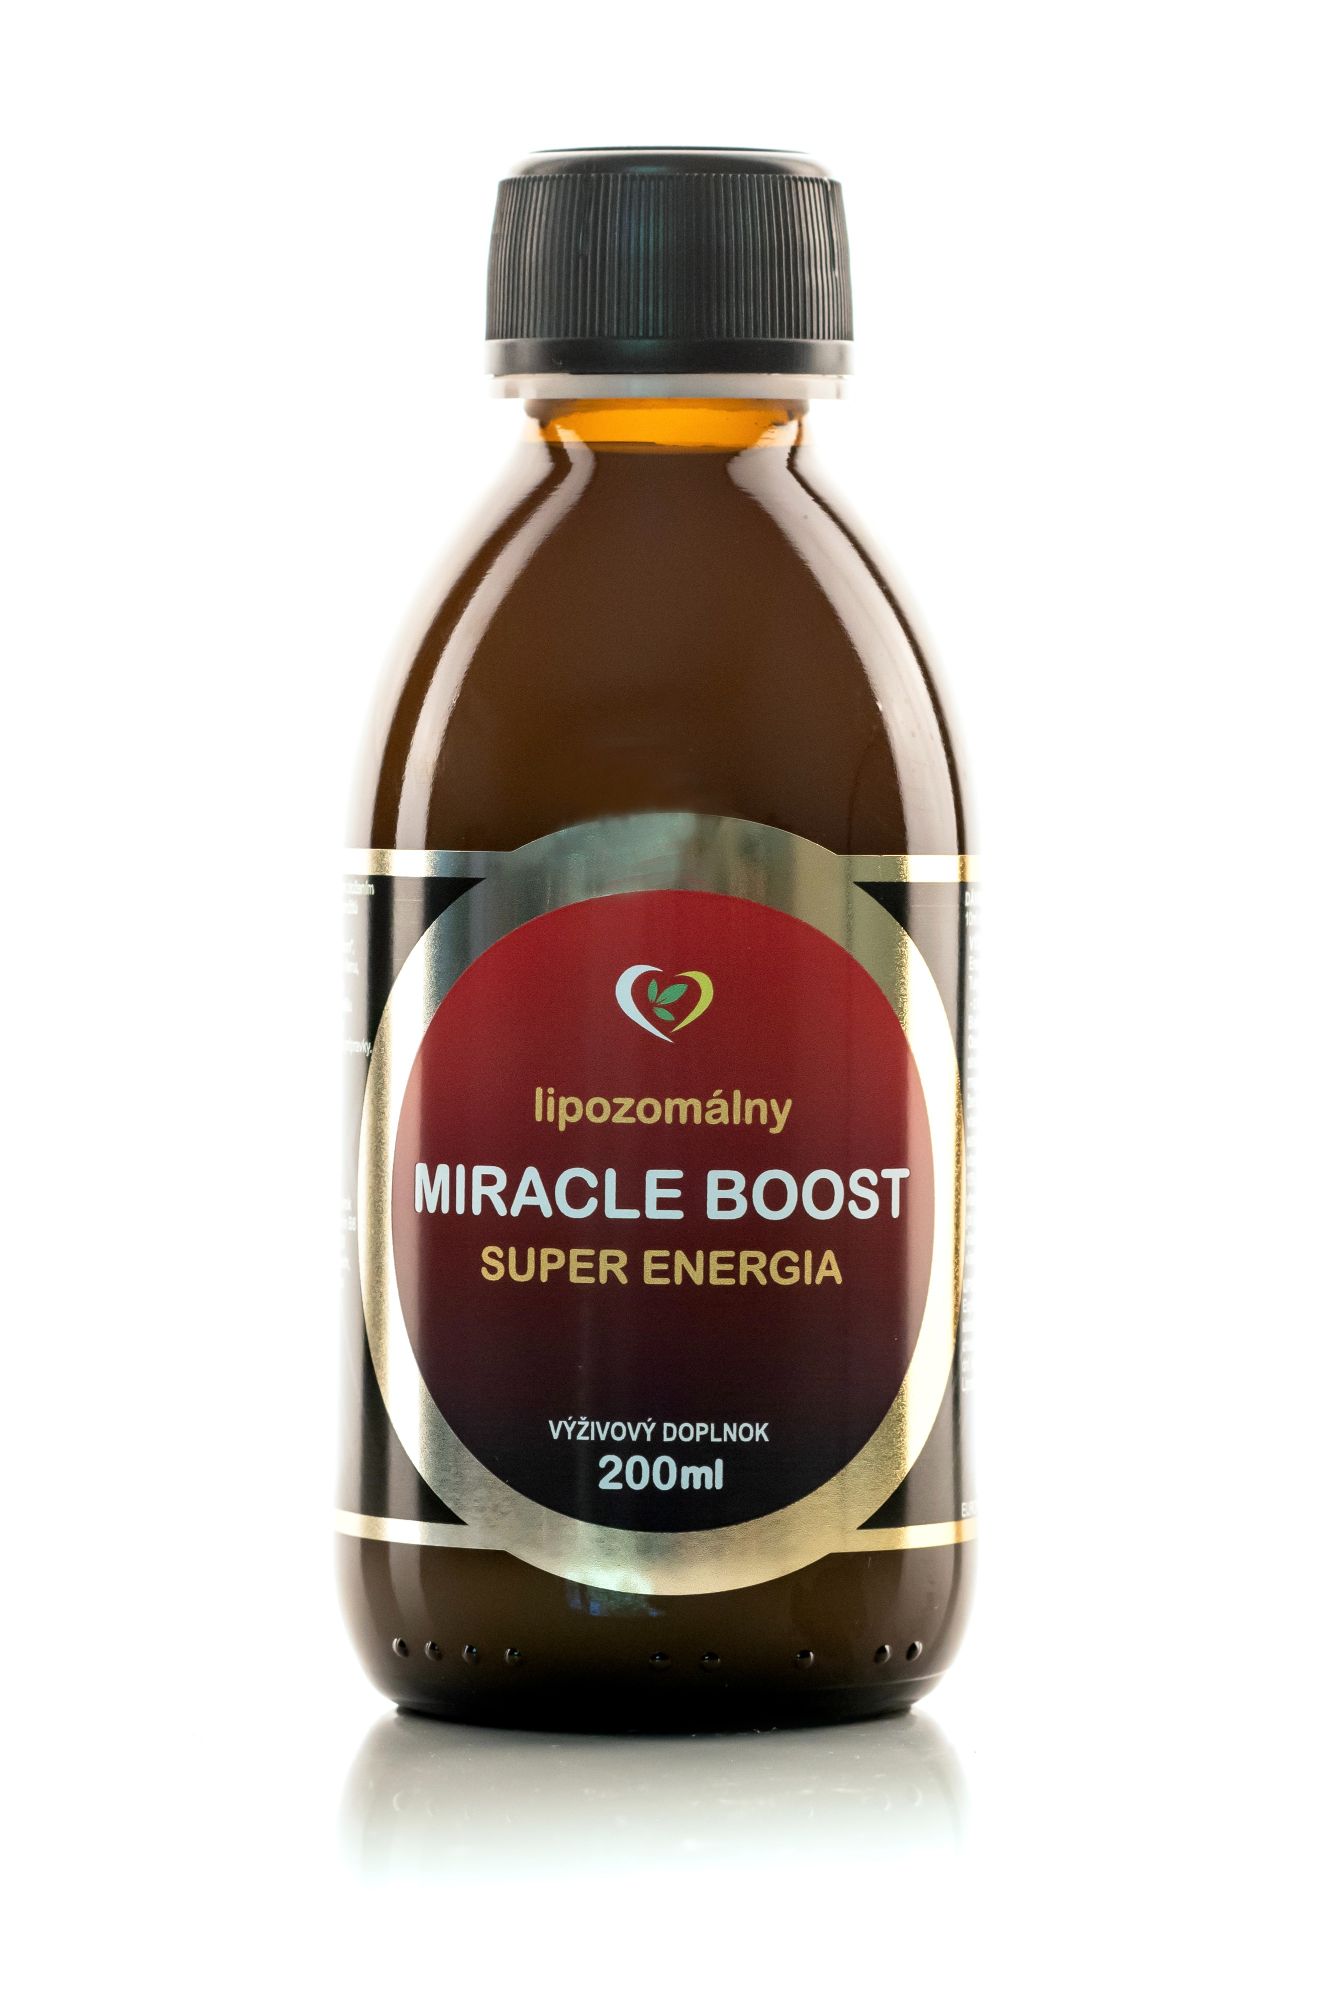 Lipozomálny MIRACLE BOOST super energia